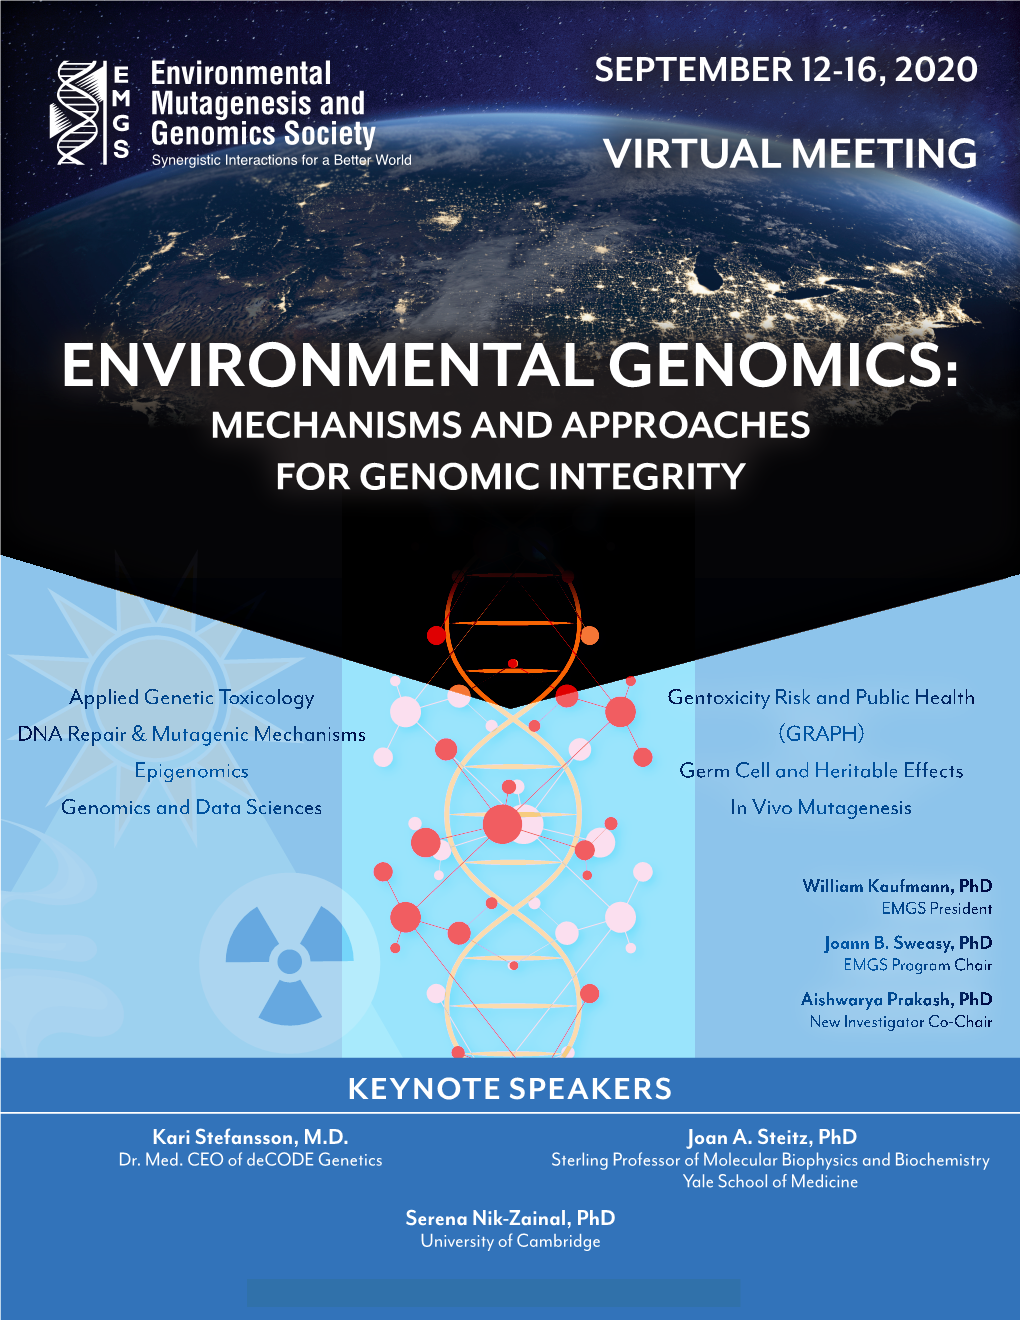 Environmental Genomics: Mechanisms and Approaches for Genomic Integrity